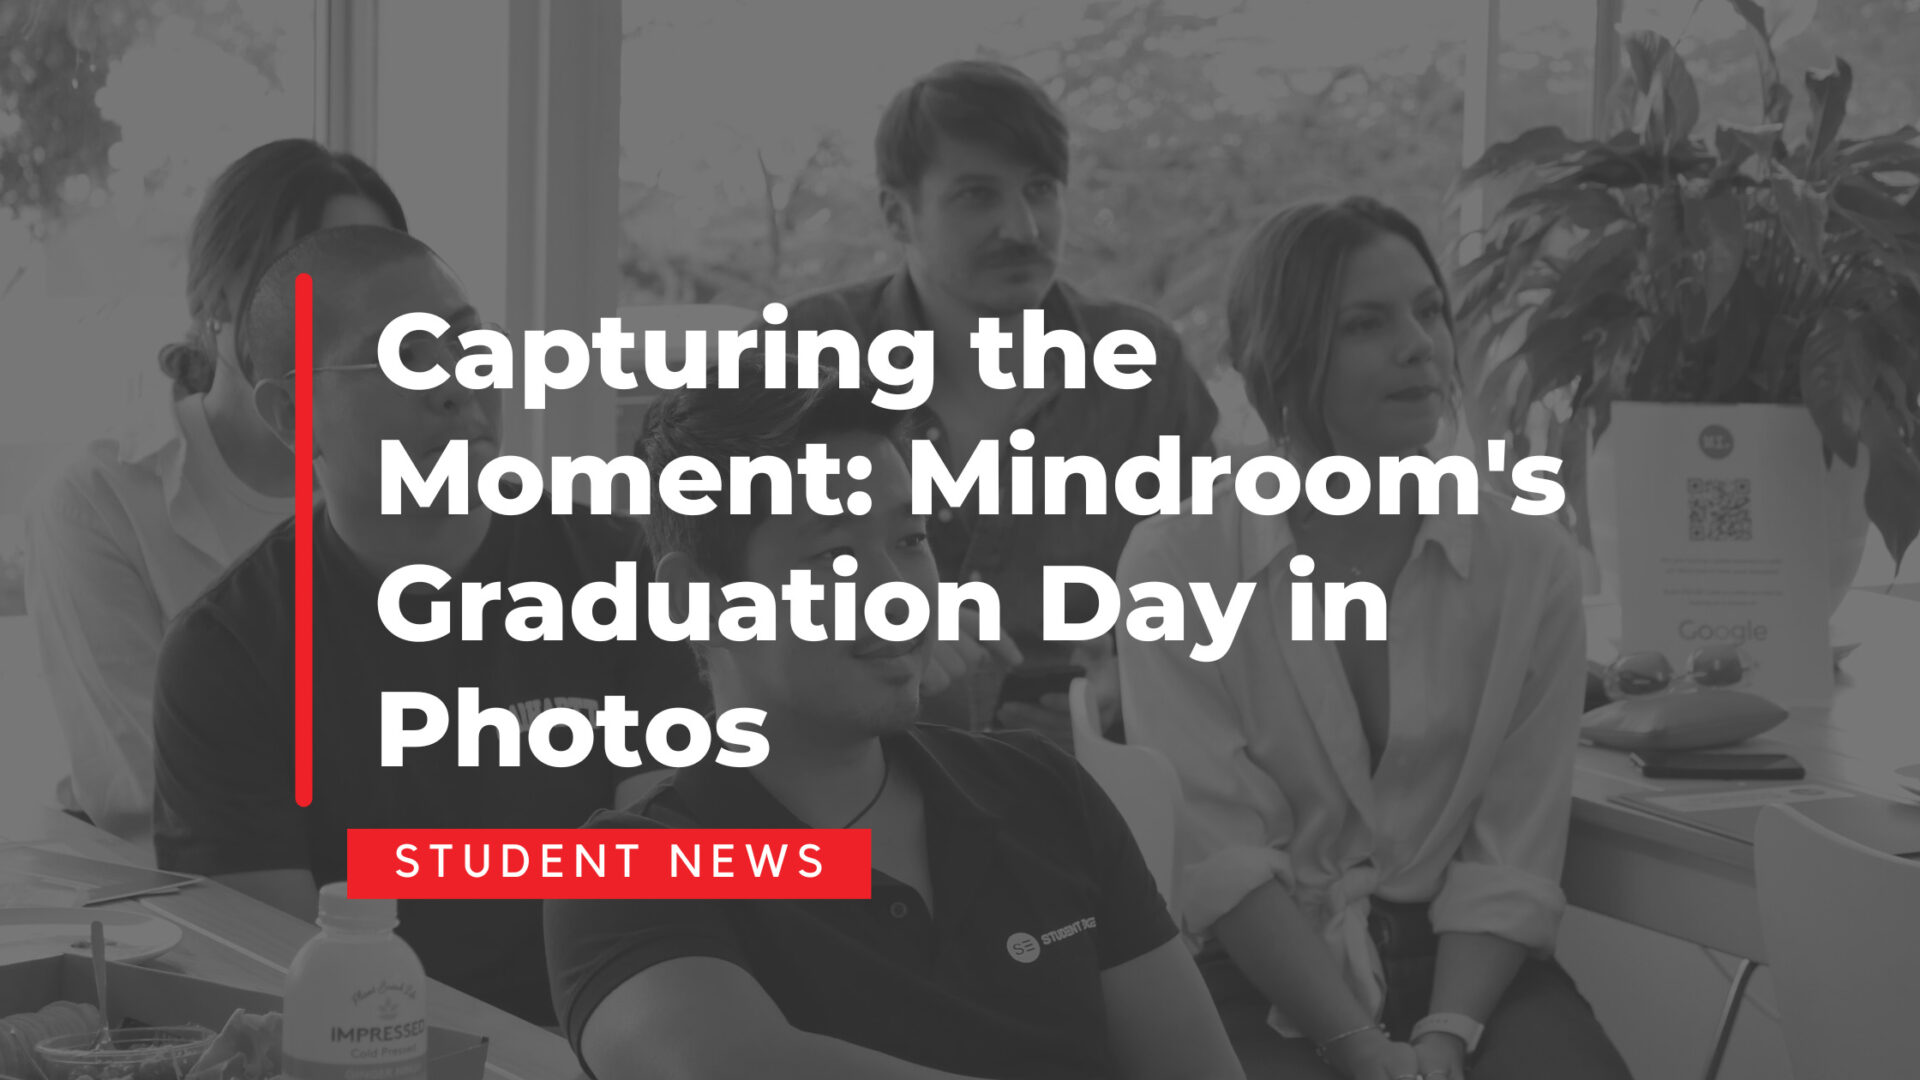 Capturing the Moment: Mindroom’s Graduation Day in Photos